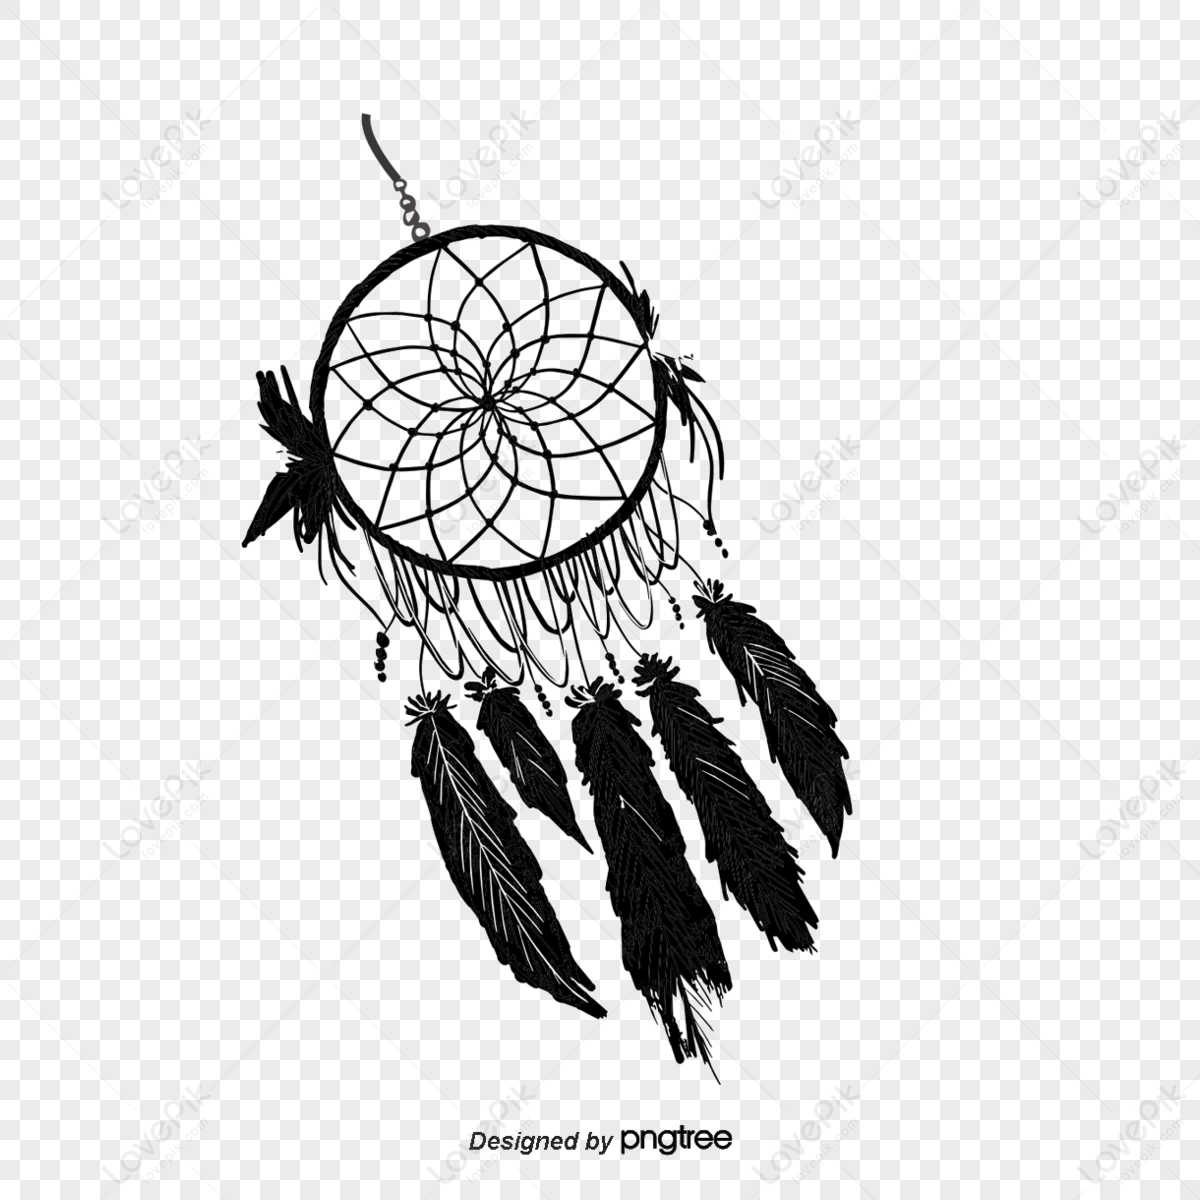 Catcher Icon PNG Images, Vectors Free Download - Pngtree